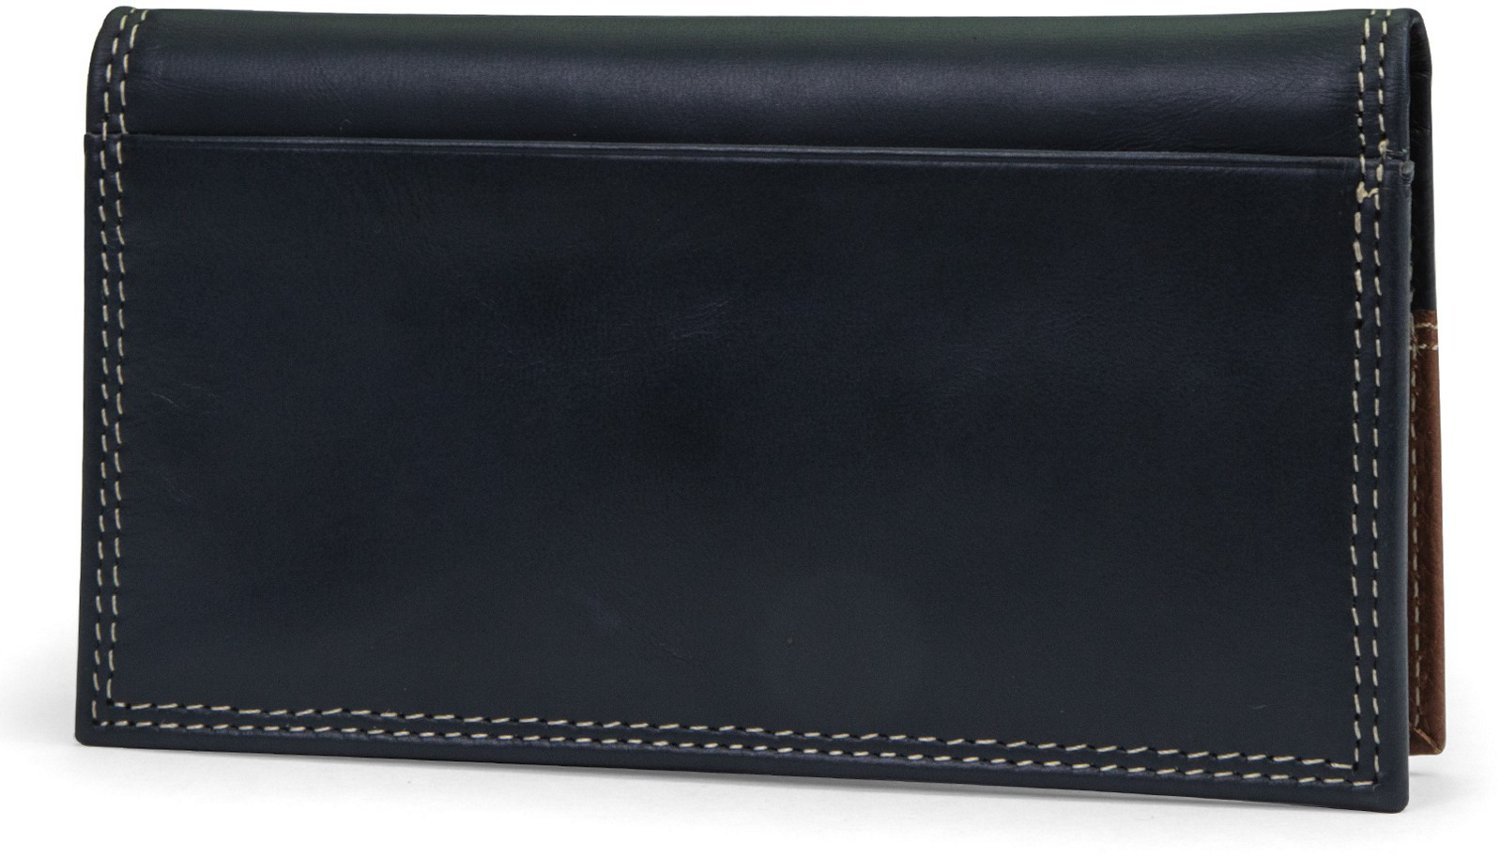 Timberland Pro Ellet Rodeo Leather Long Bifold Wallet | Academy